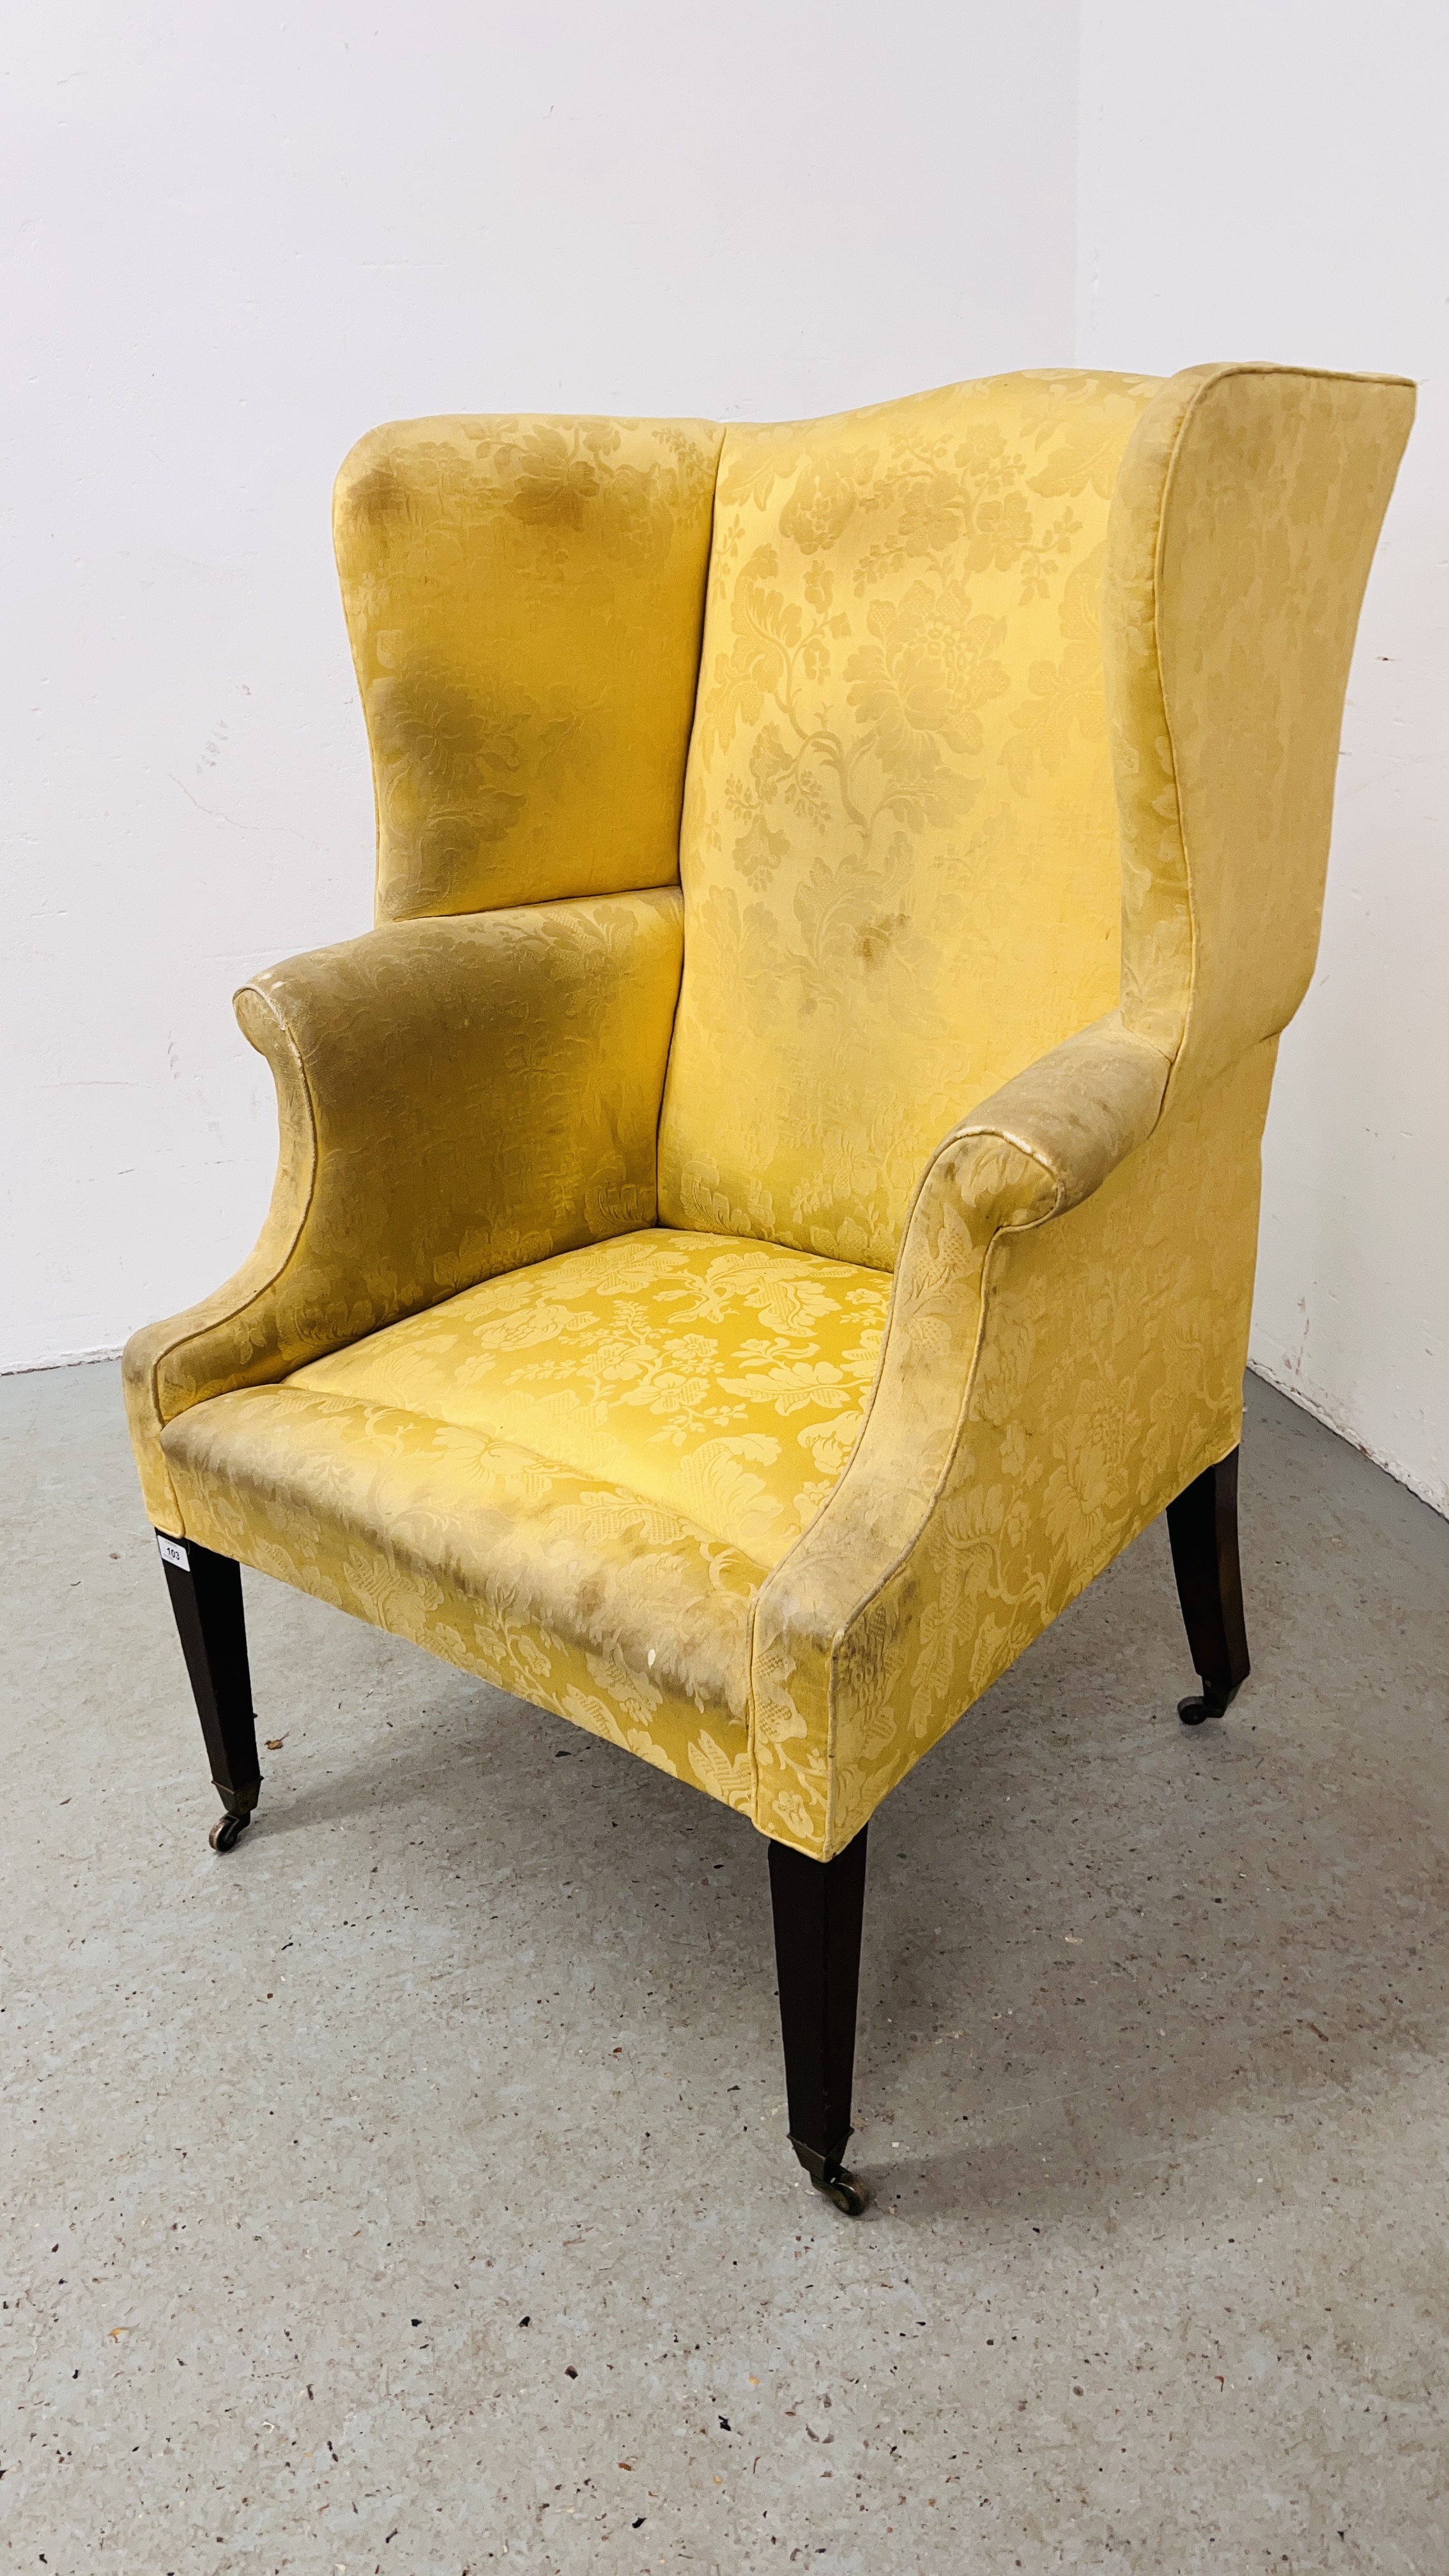 A LATE GEORGIAN MAHOGANY WINGED ARM CHAIR ON SQUARE TAPERED LEGS - Image 3 of 12